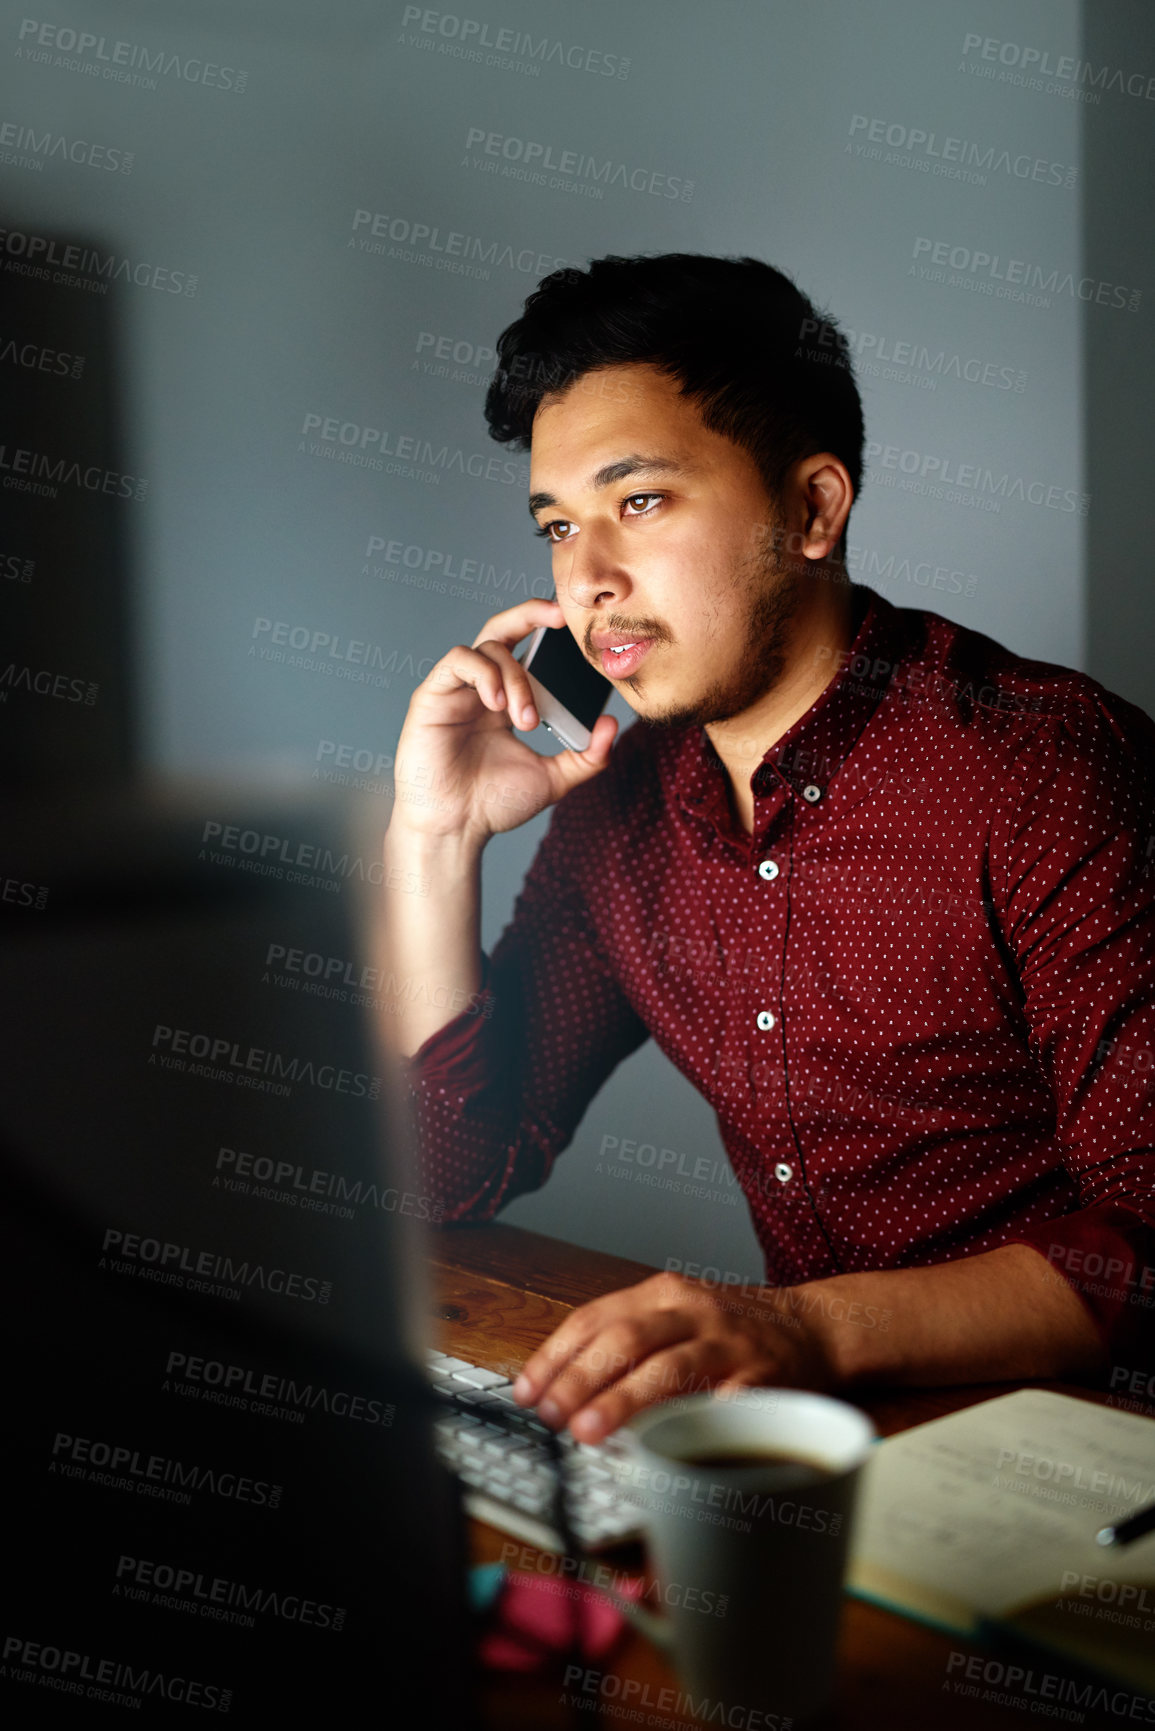 Buy stock photo Shot of a young male designer talking on the phone and working on his computer late at night